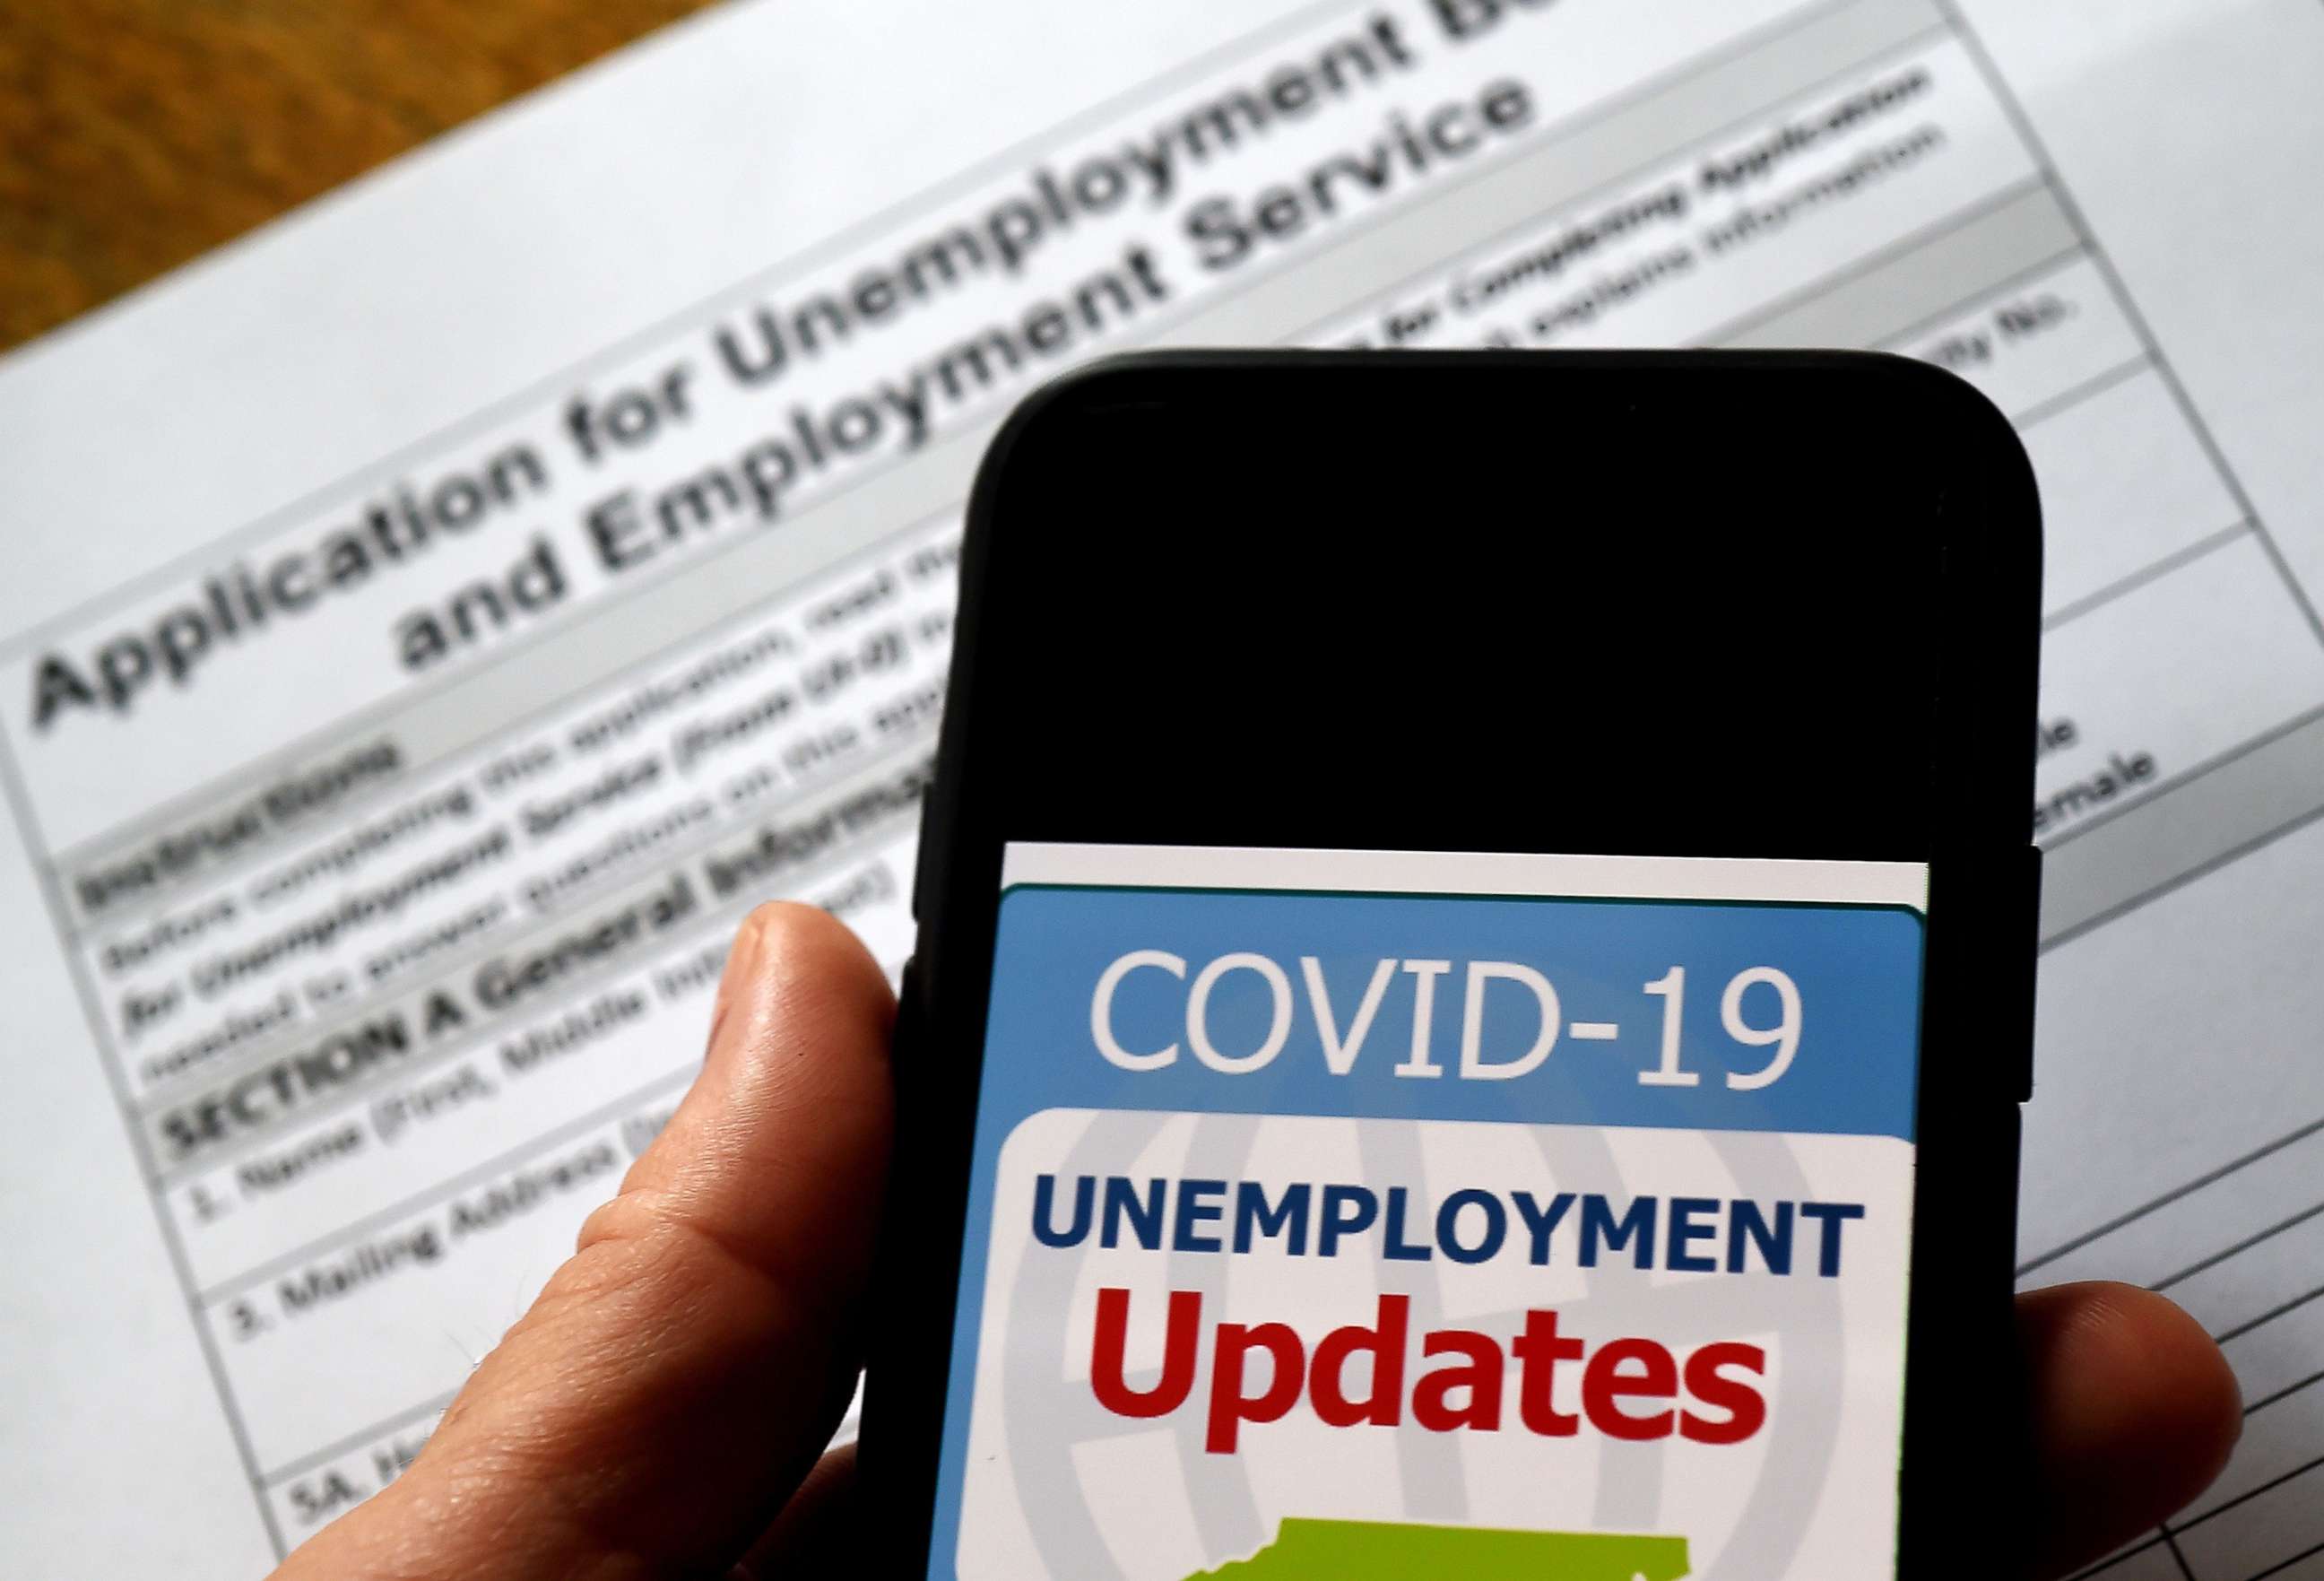 PHOTO: A COVID-19 Unemployment Assistance Updates logo is displayed on a smartphone on top of an application for unemployment benefits on May 8, 2020, in Arlington, Va.